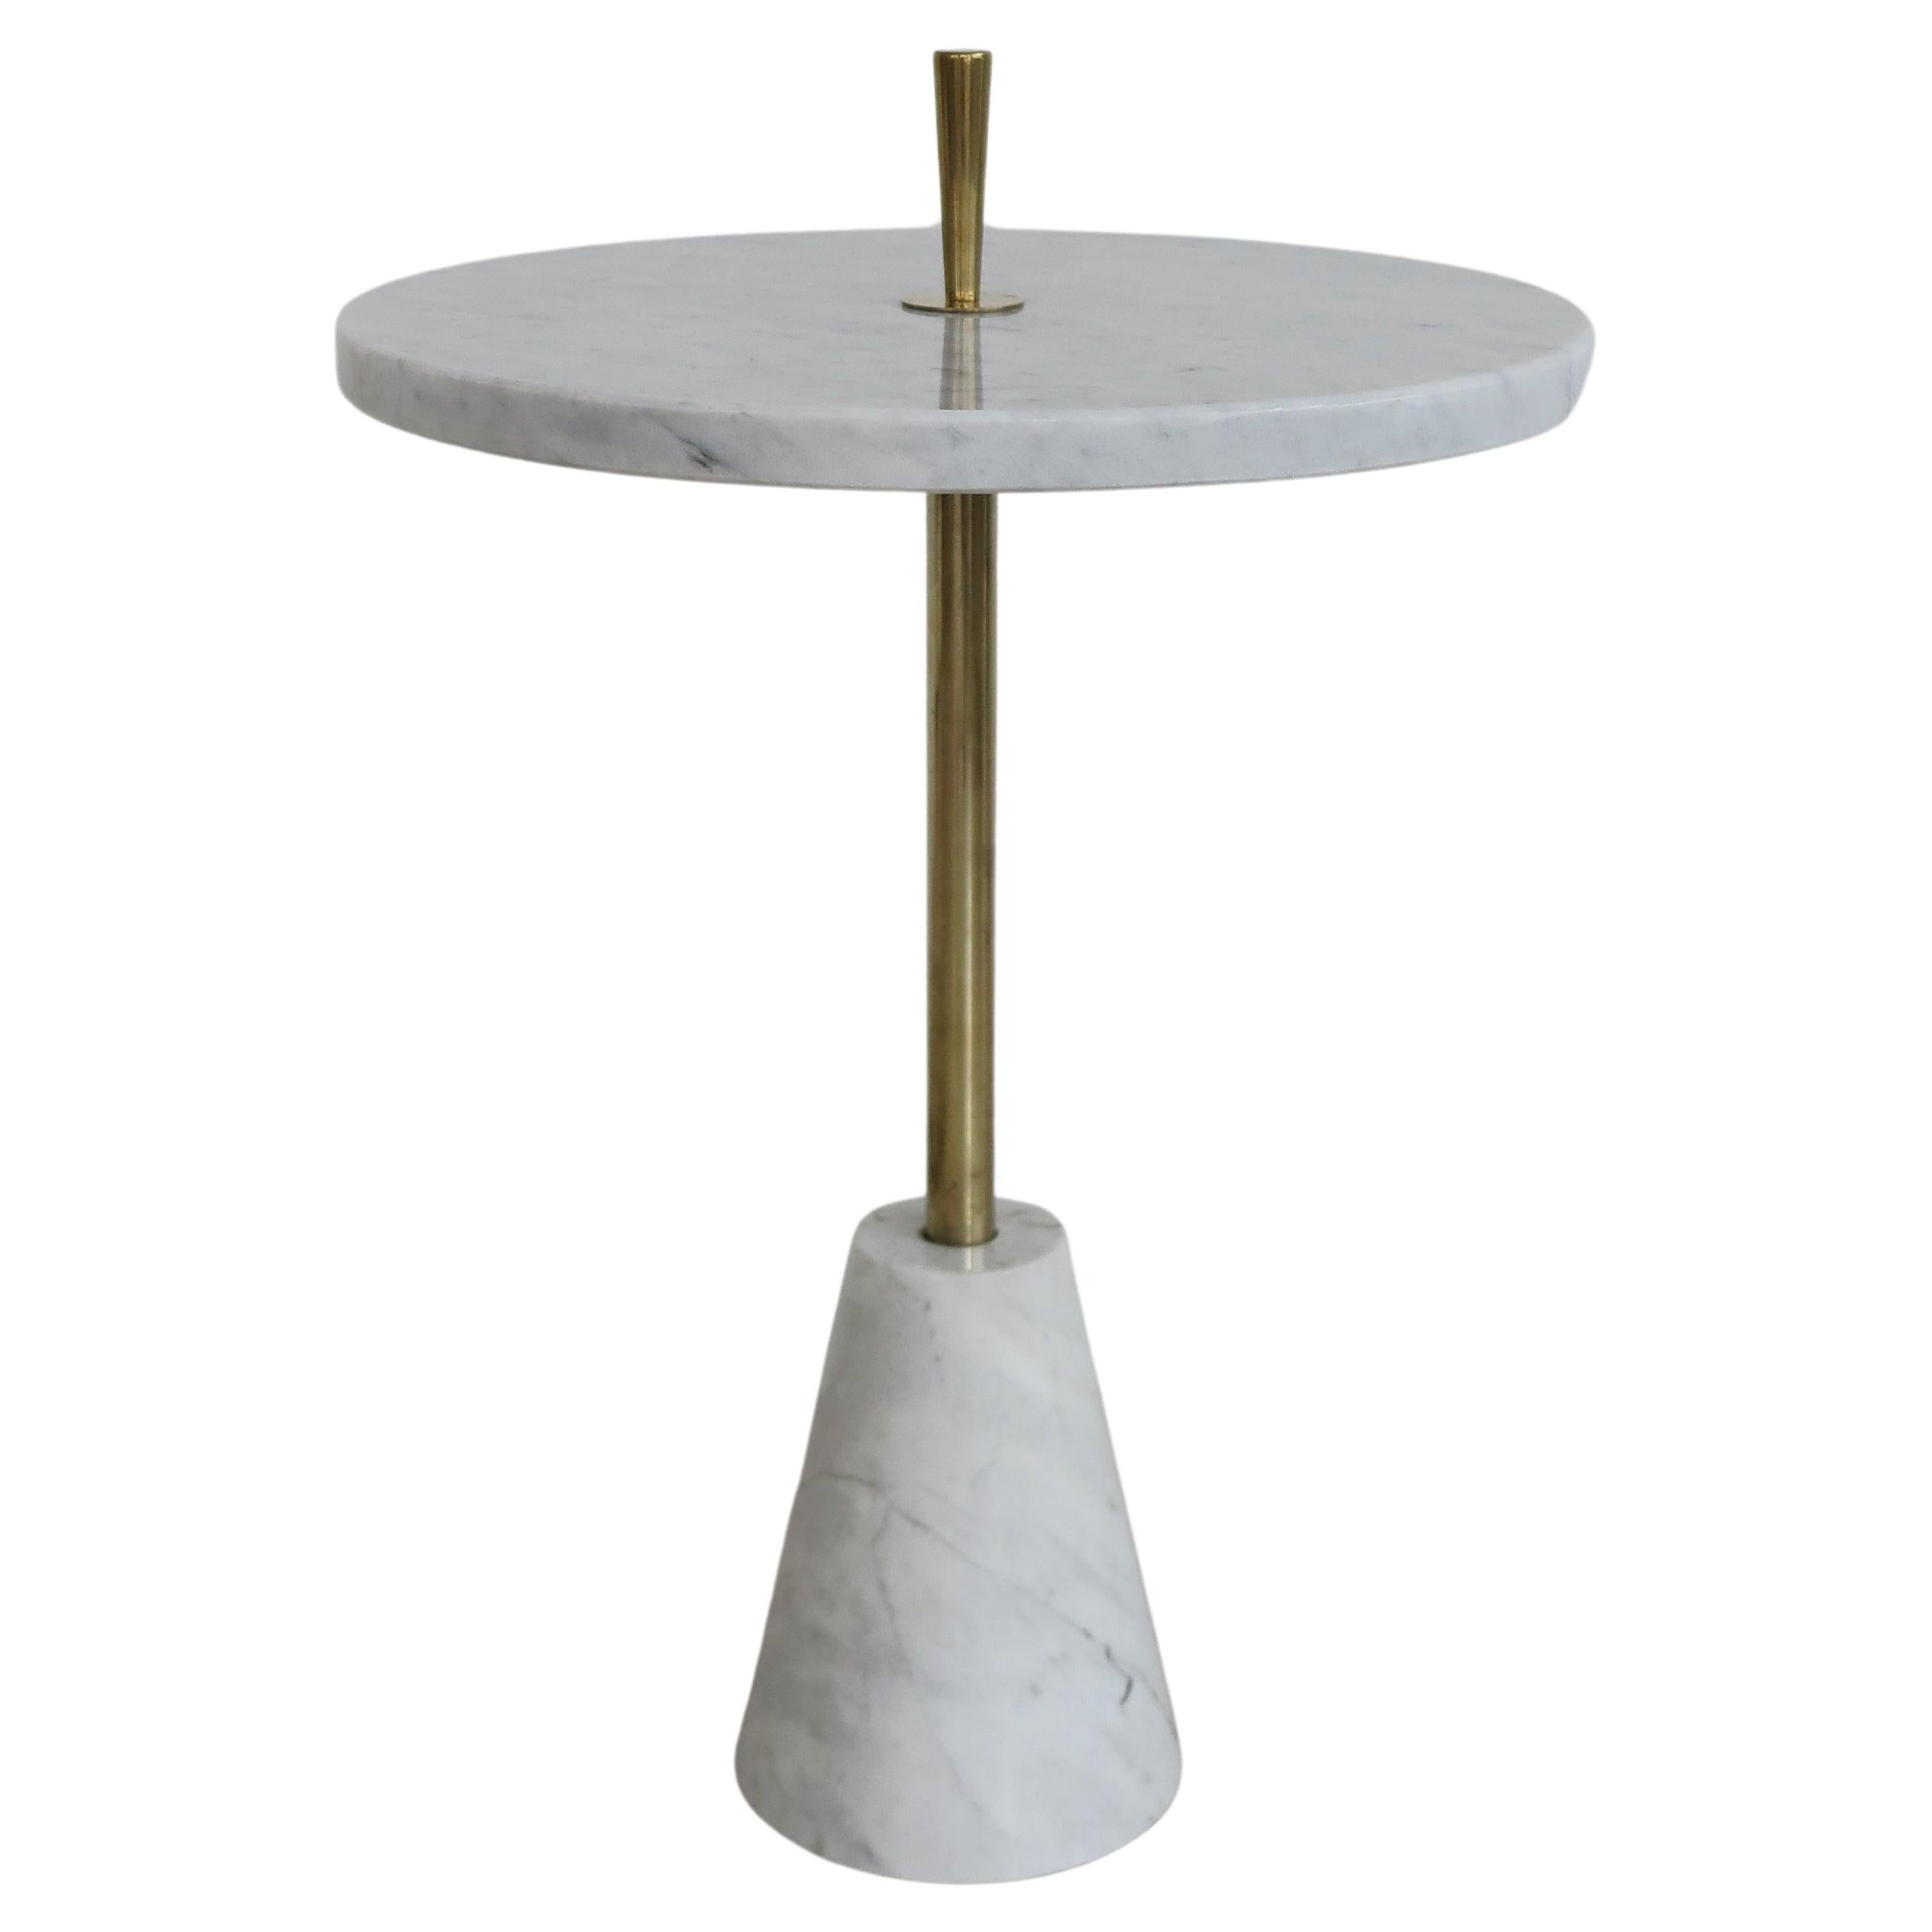 Italian Brass and Carrara Marble Coffe Table, 1970s For Sale